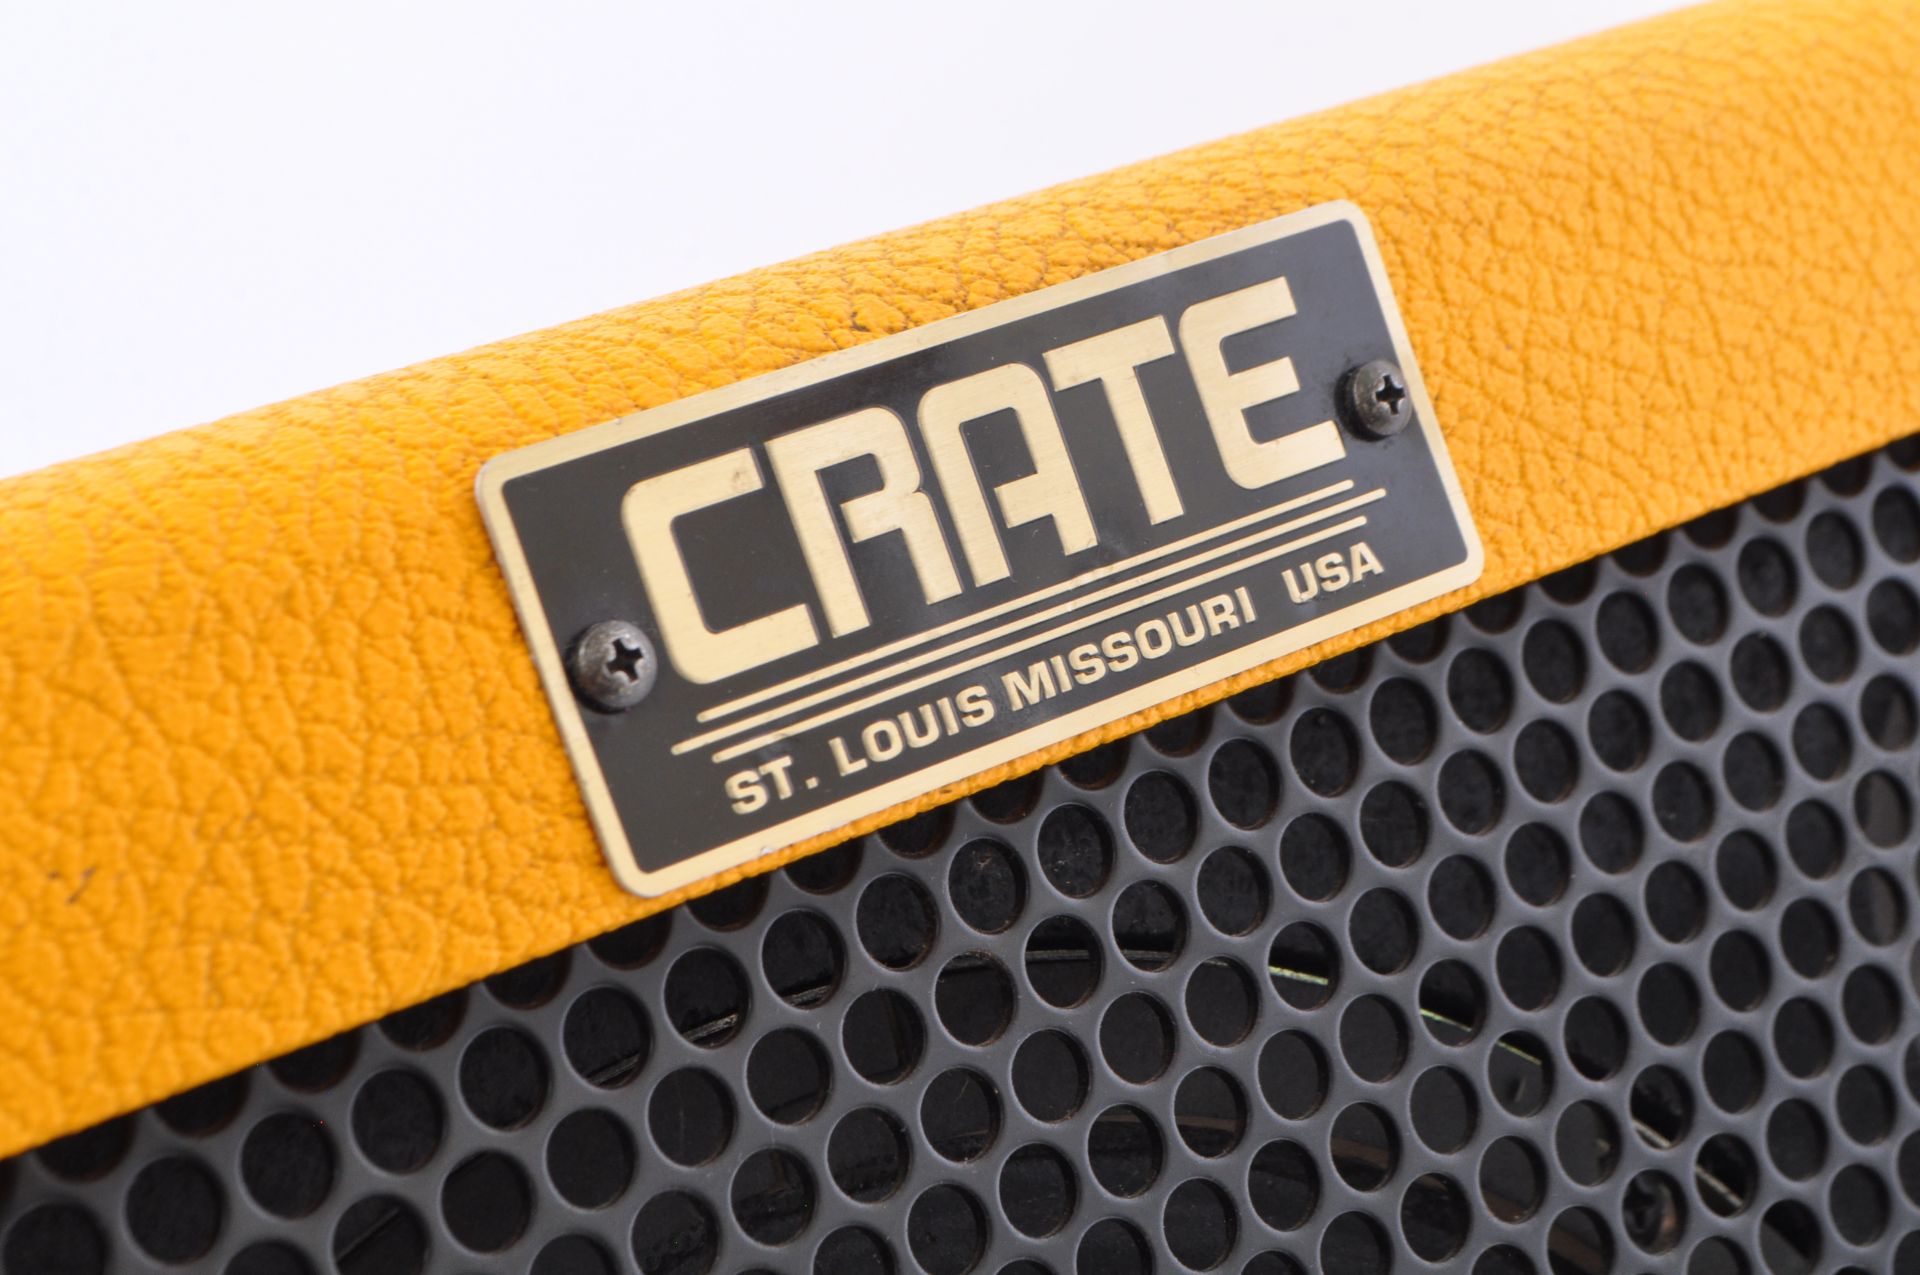 CONTEMPORARY AUDIO GUITAR TAXI TX30W AMPLIFIER BY CRATE - Image 7 of 7